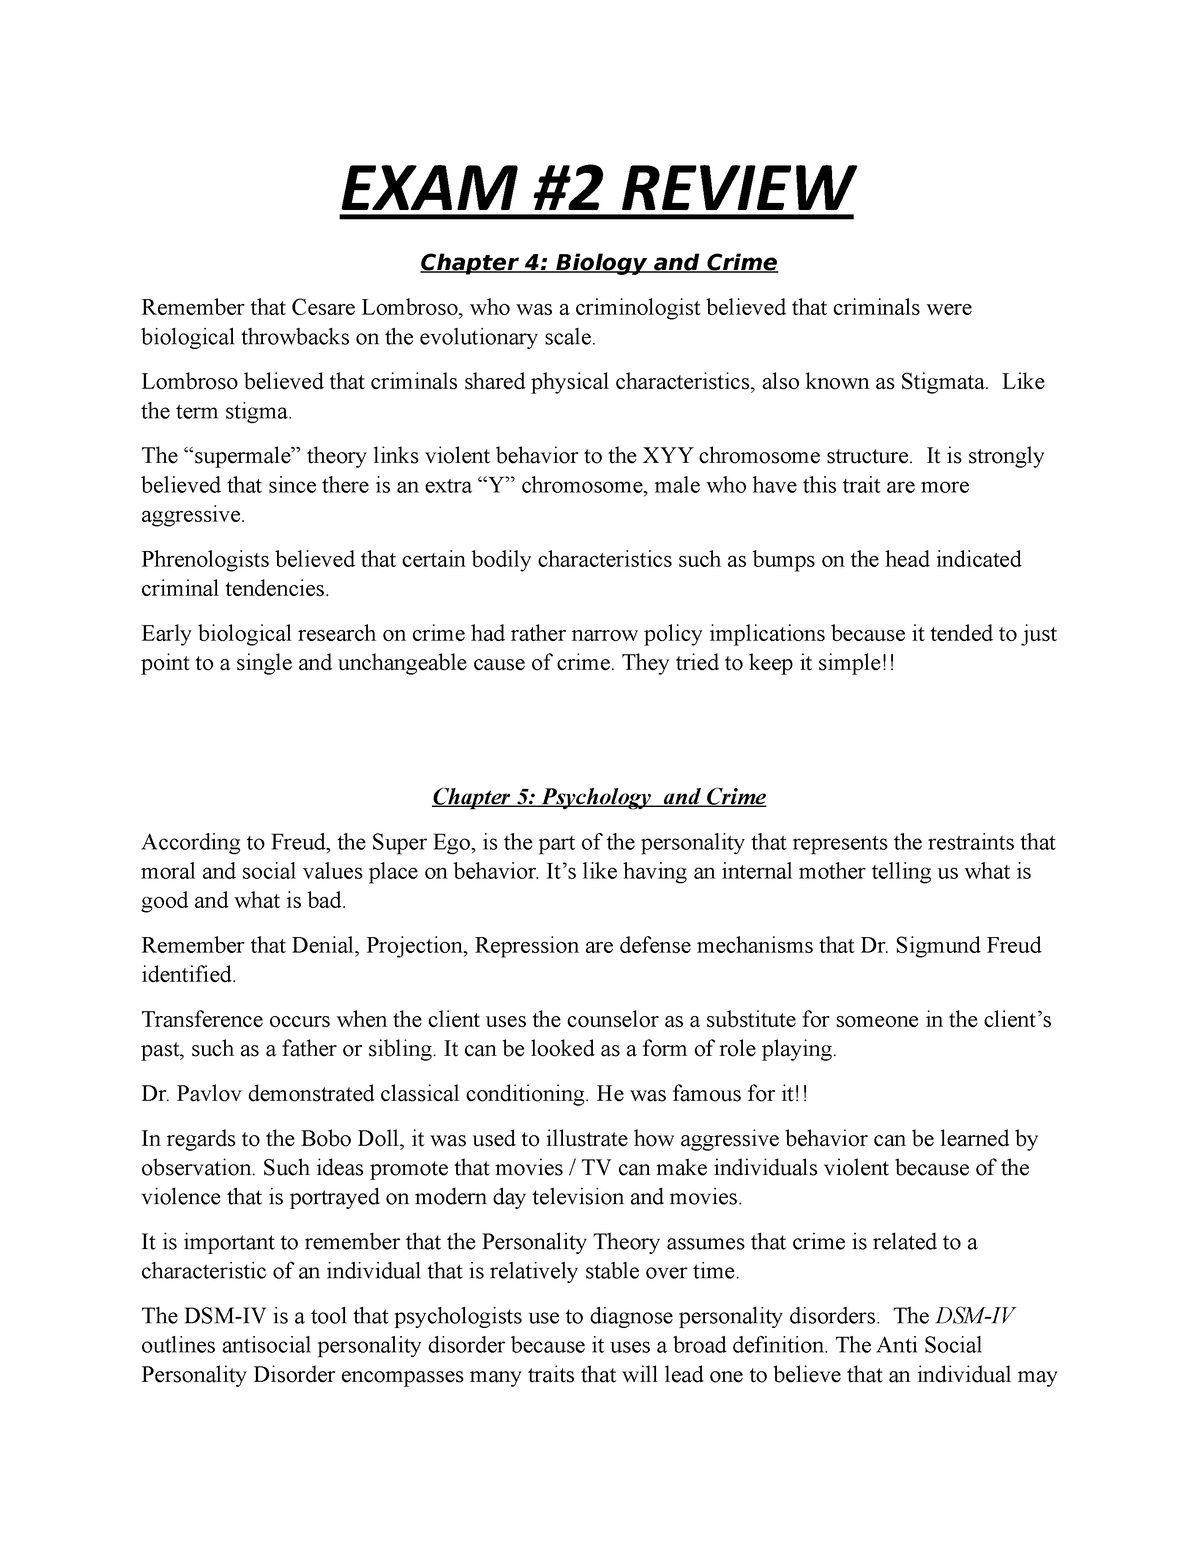 Quiz 2 Review Sheet its criminal and law class EXAM #2 REVIEW